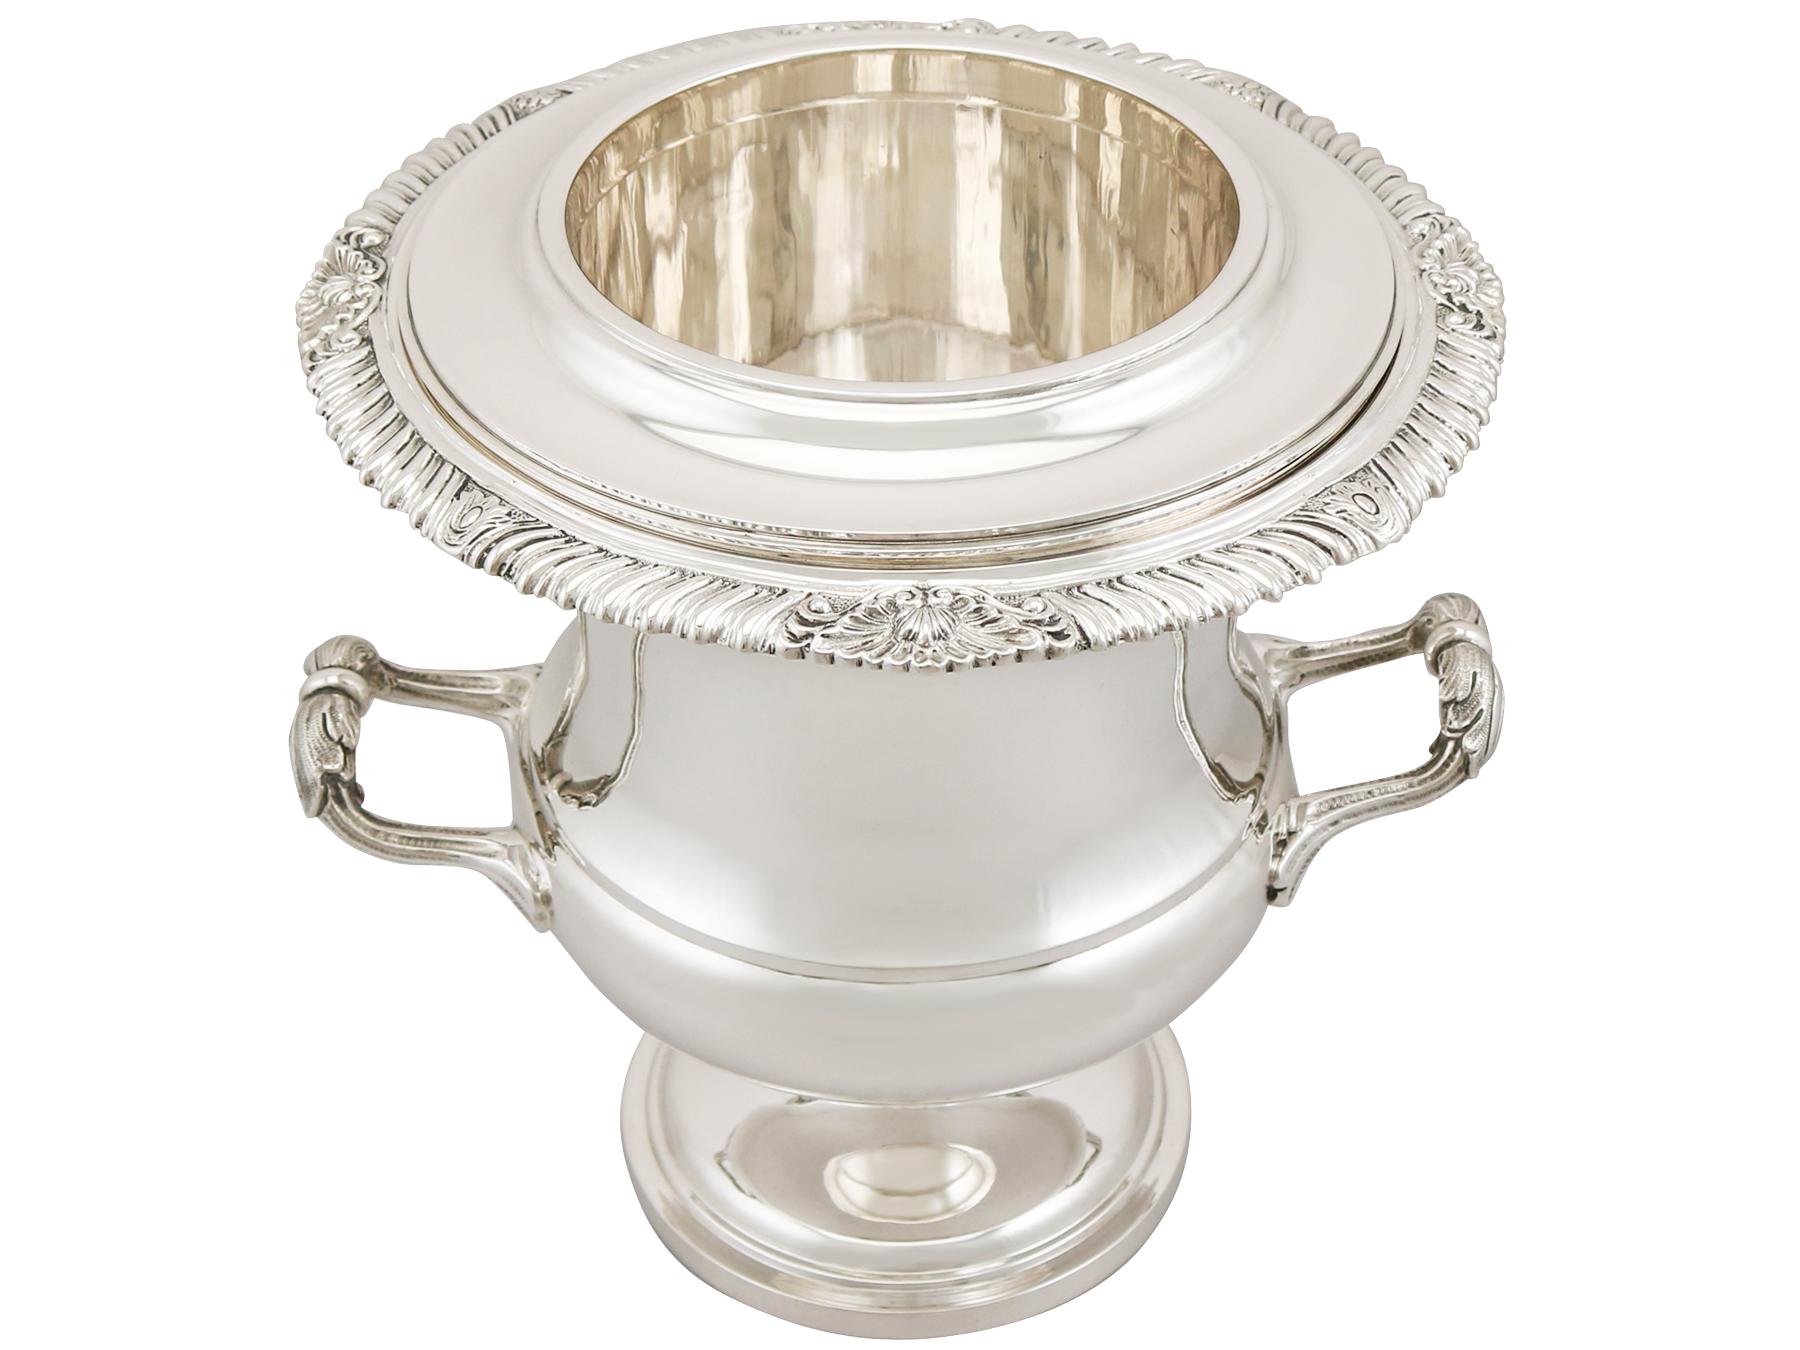 A magnificent, fine and impressive vintage Elizabeth II English sterling silver wine cooler made by Garrard & Co Ltd; an addition to our presentation silverware collection.

This magnificent vintage Elizabeth II sterling silver wine cooler has a